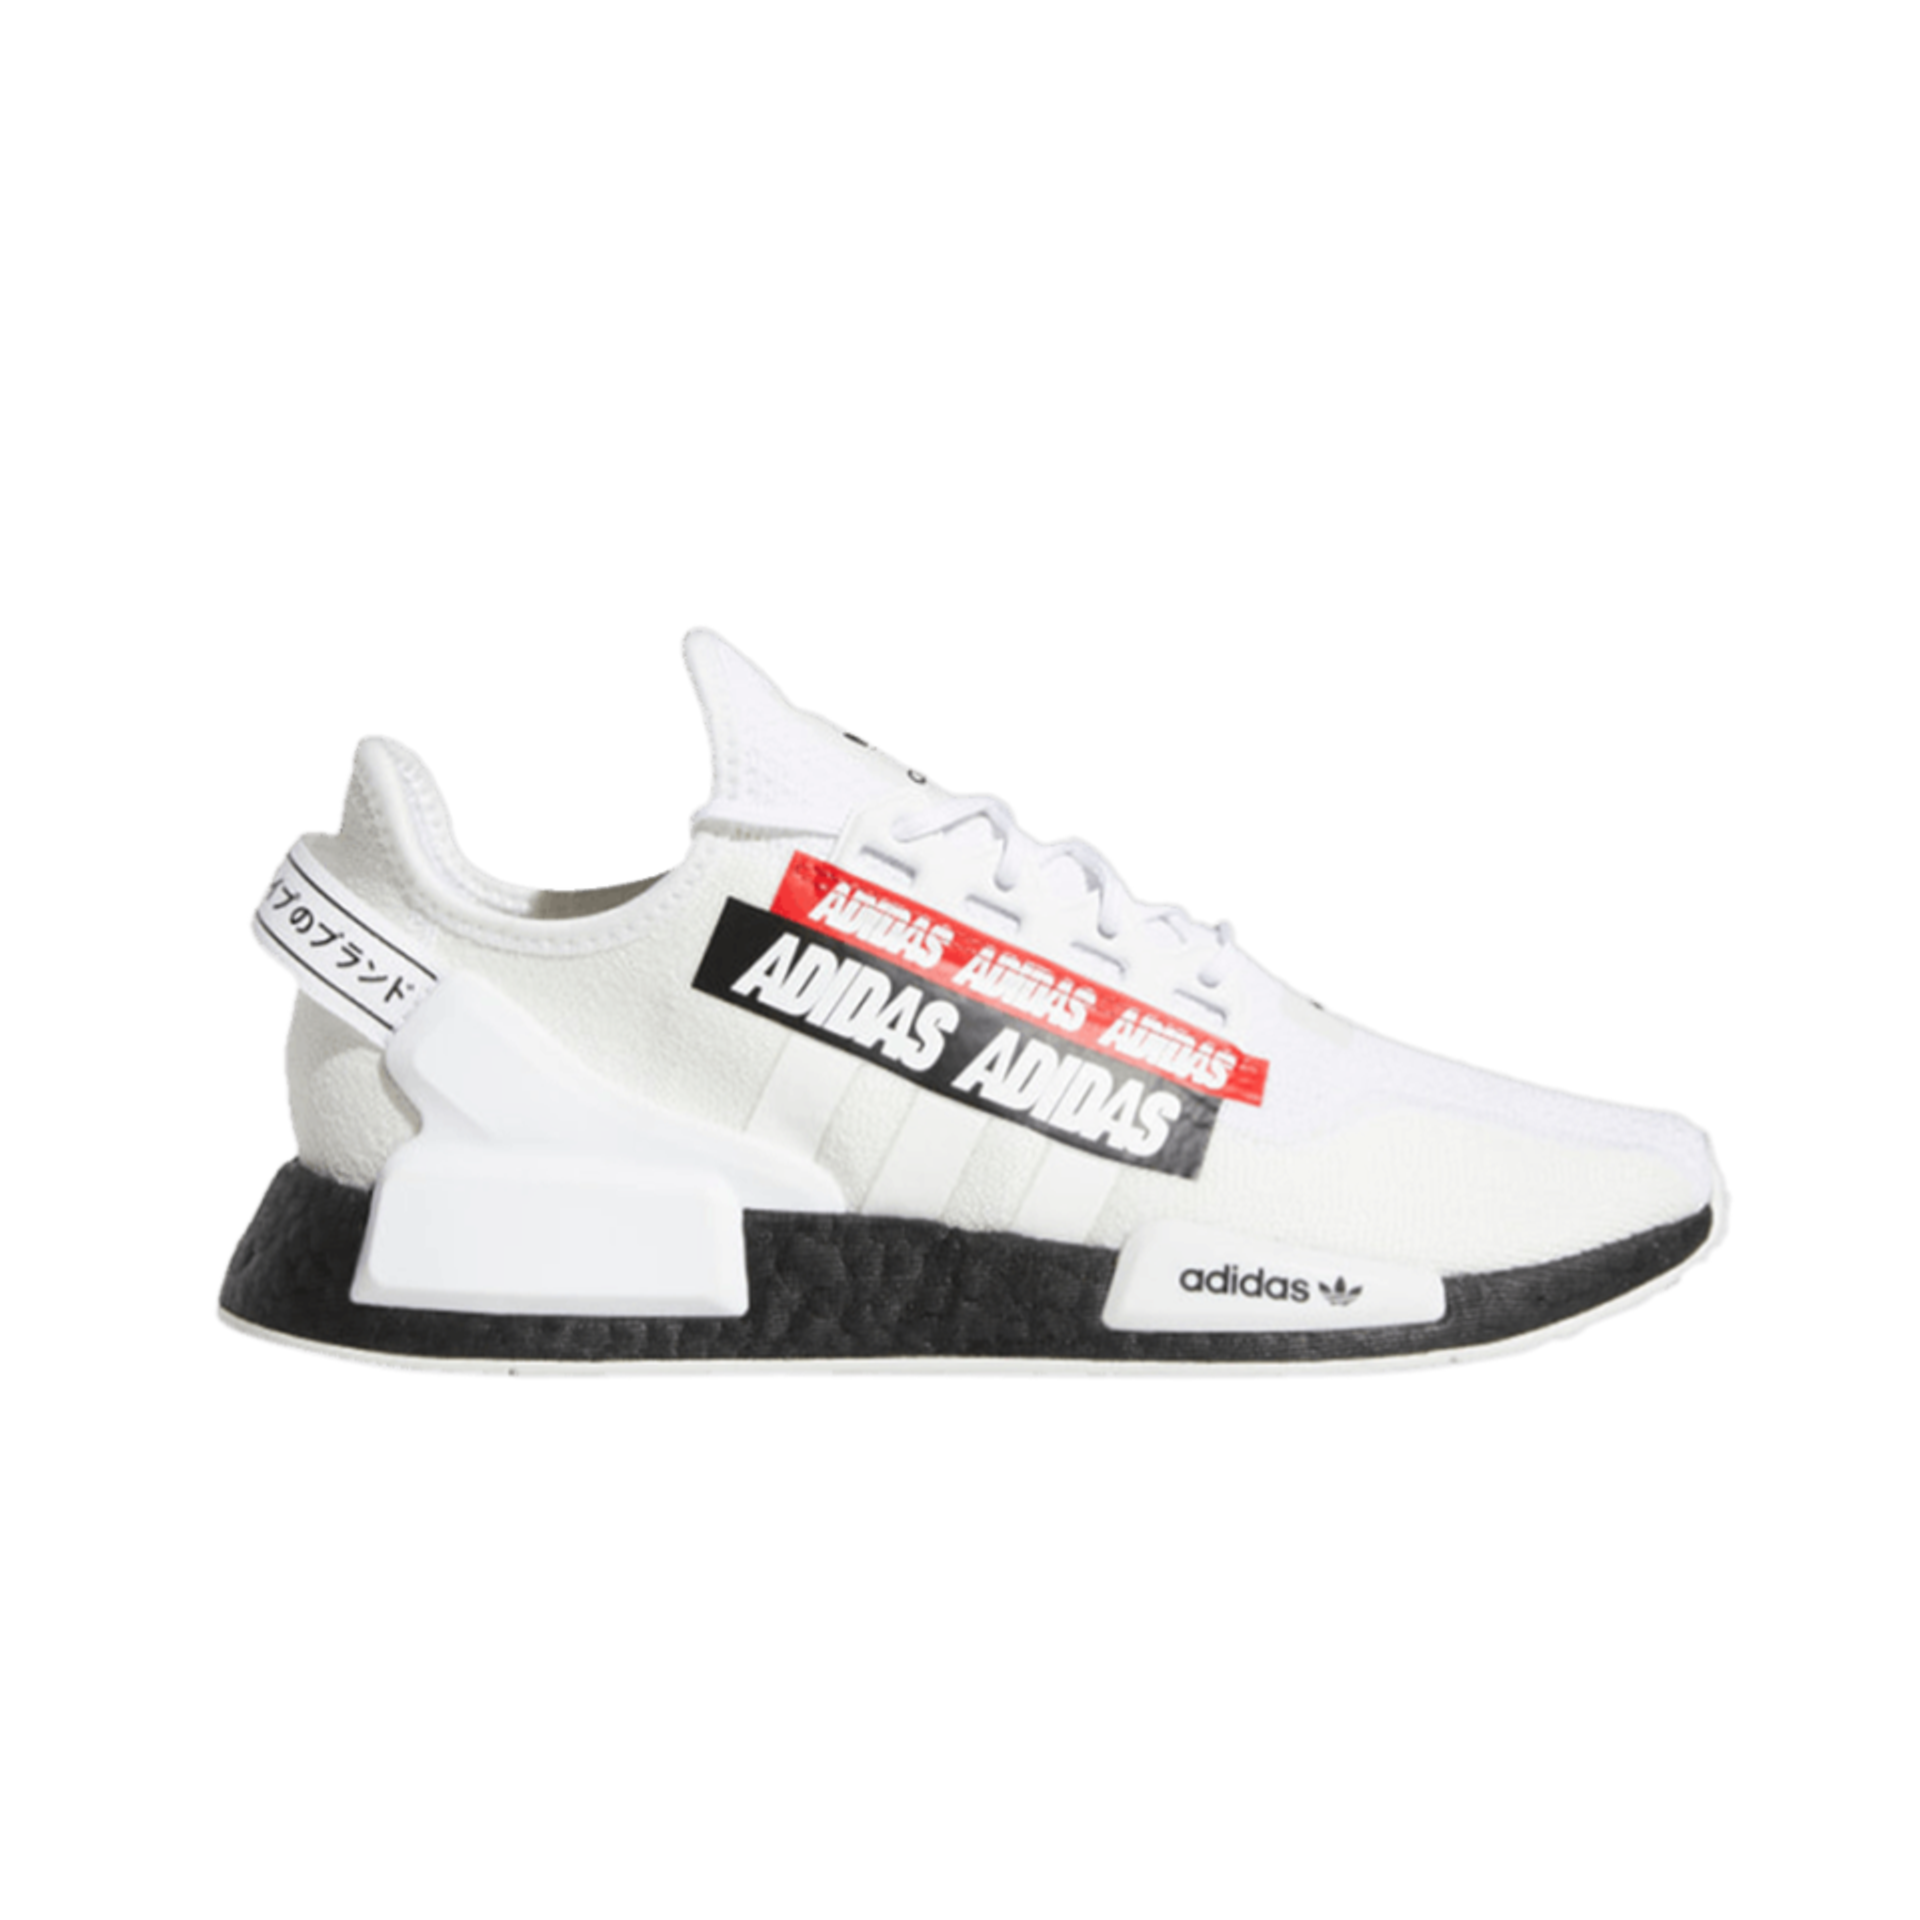 adidas NMD_R1 V2 'Overbranded'